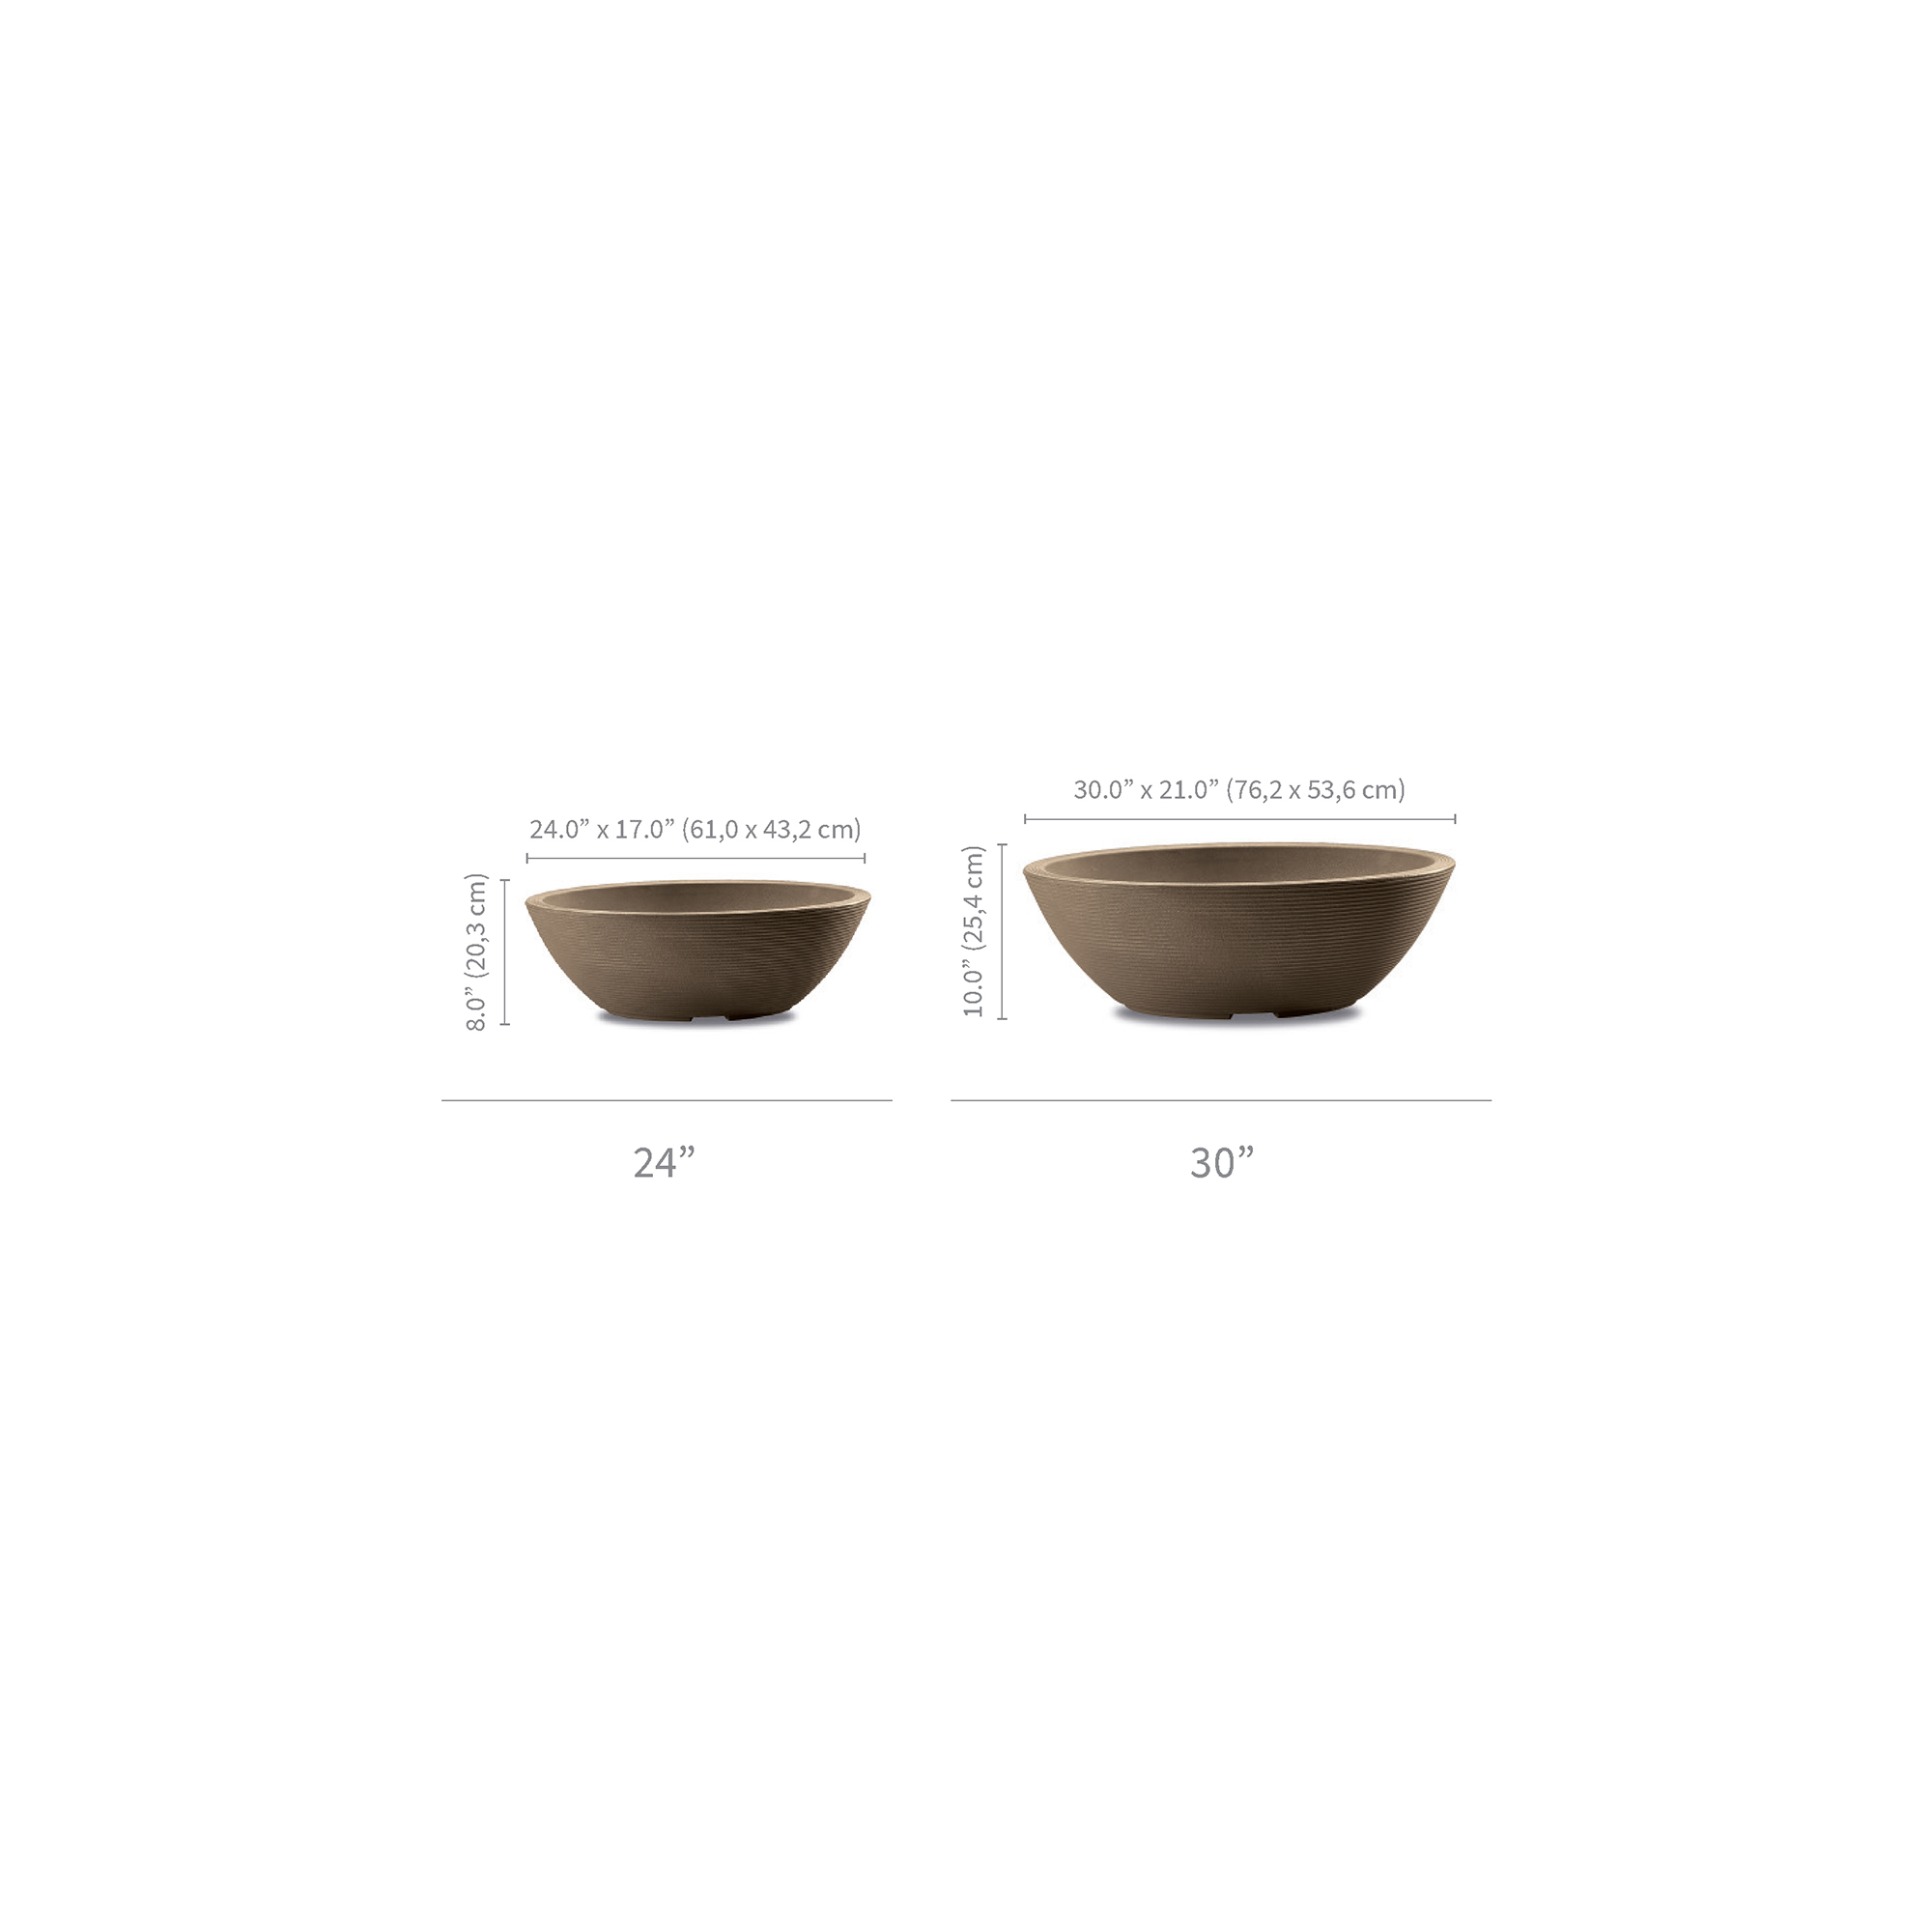 Delano Oval bowls specifications